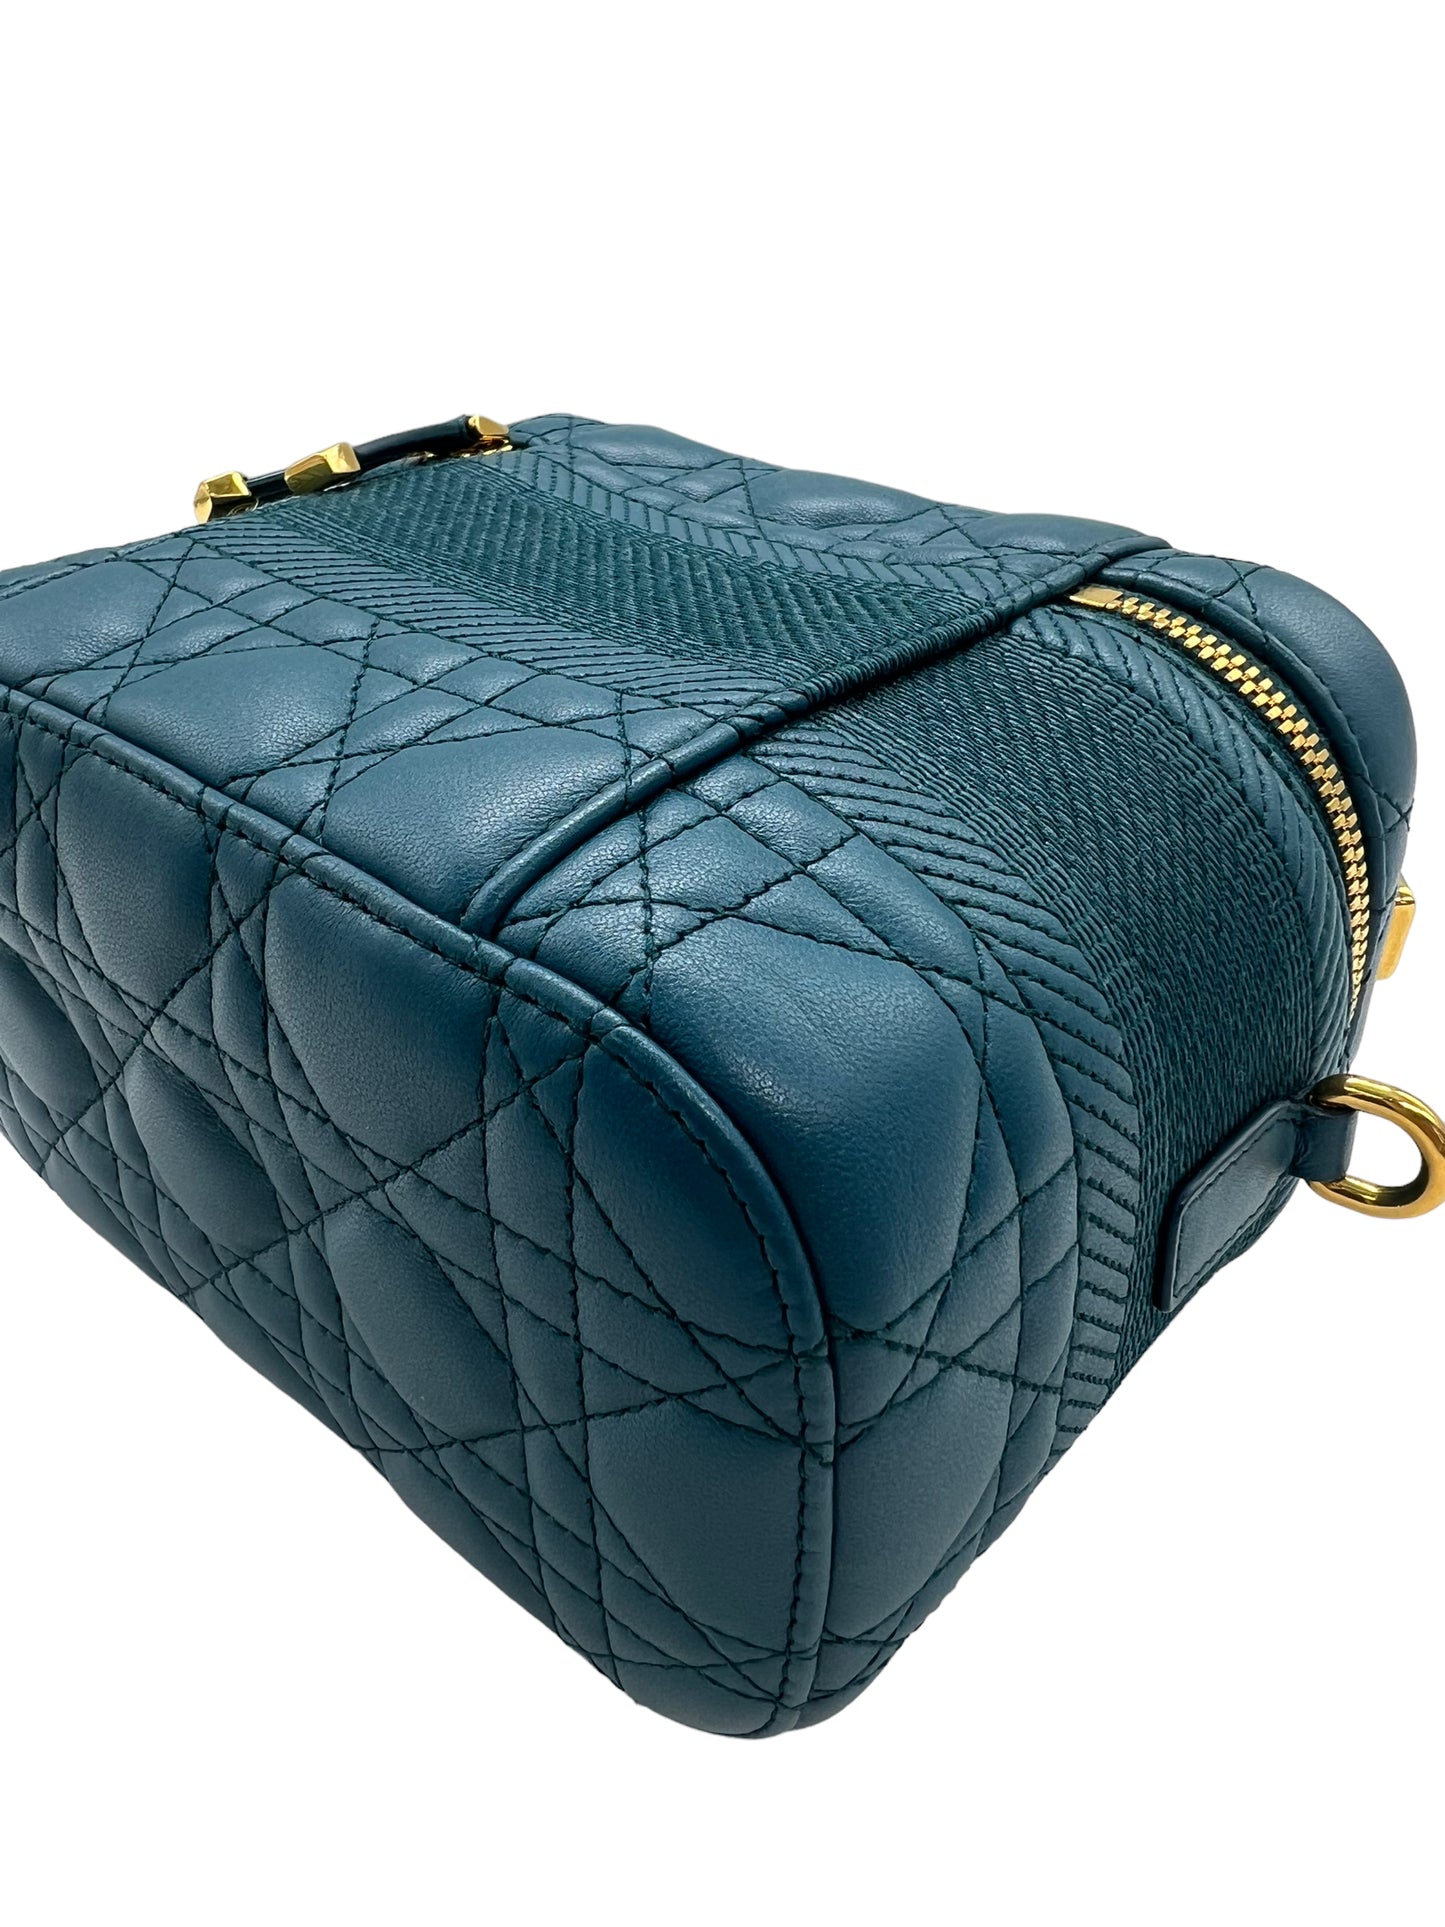 Dior Teal Lambskin Small Cannage Diortravel Vanity Case